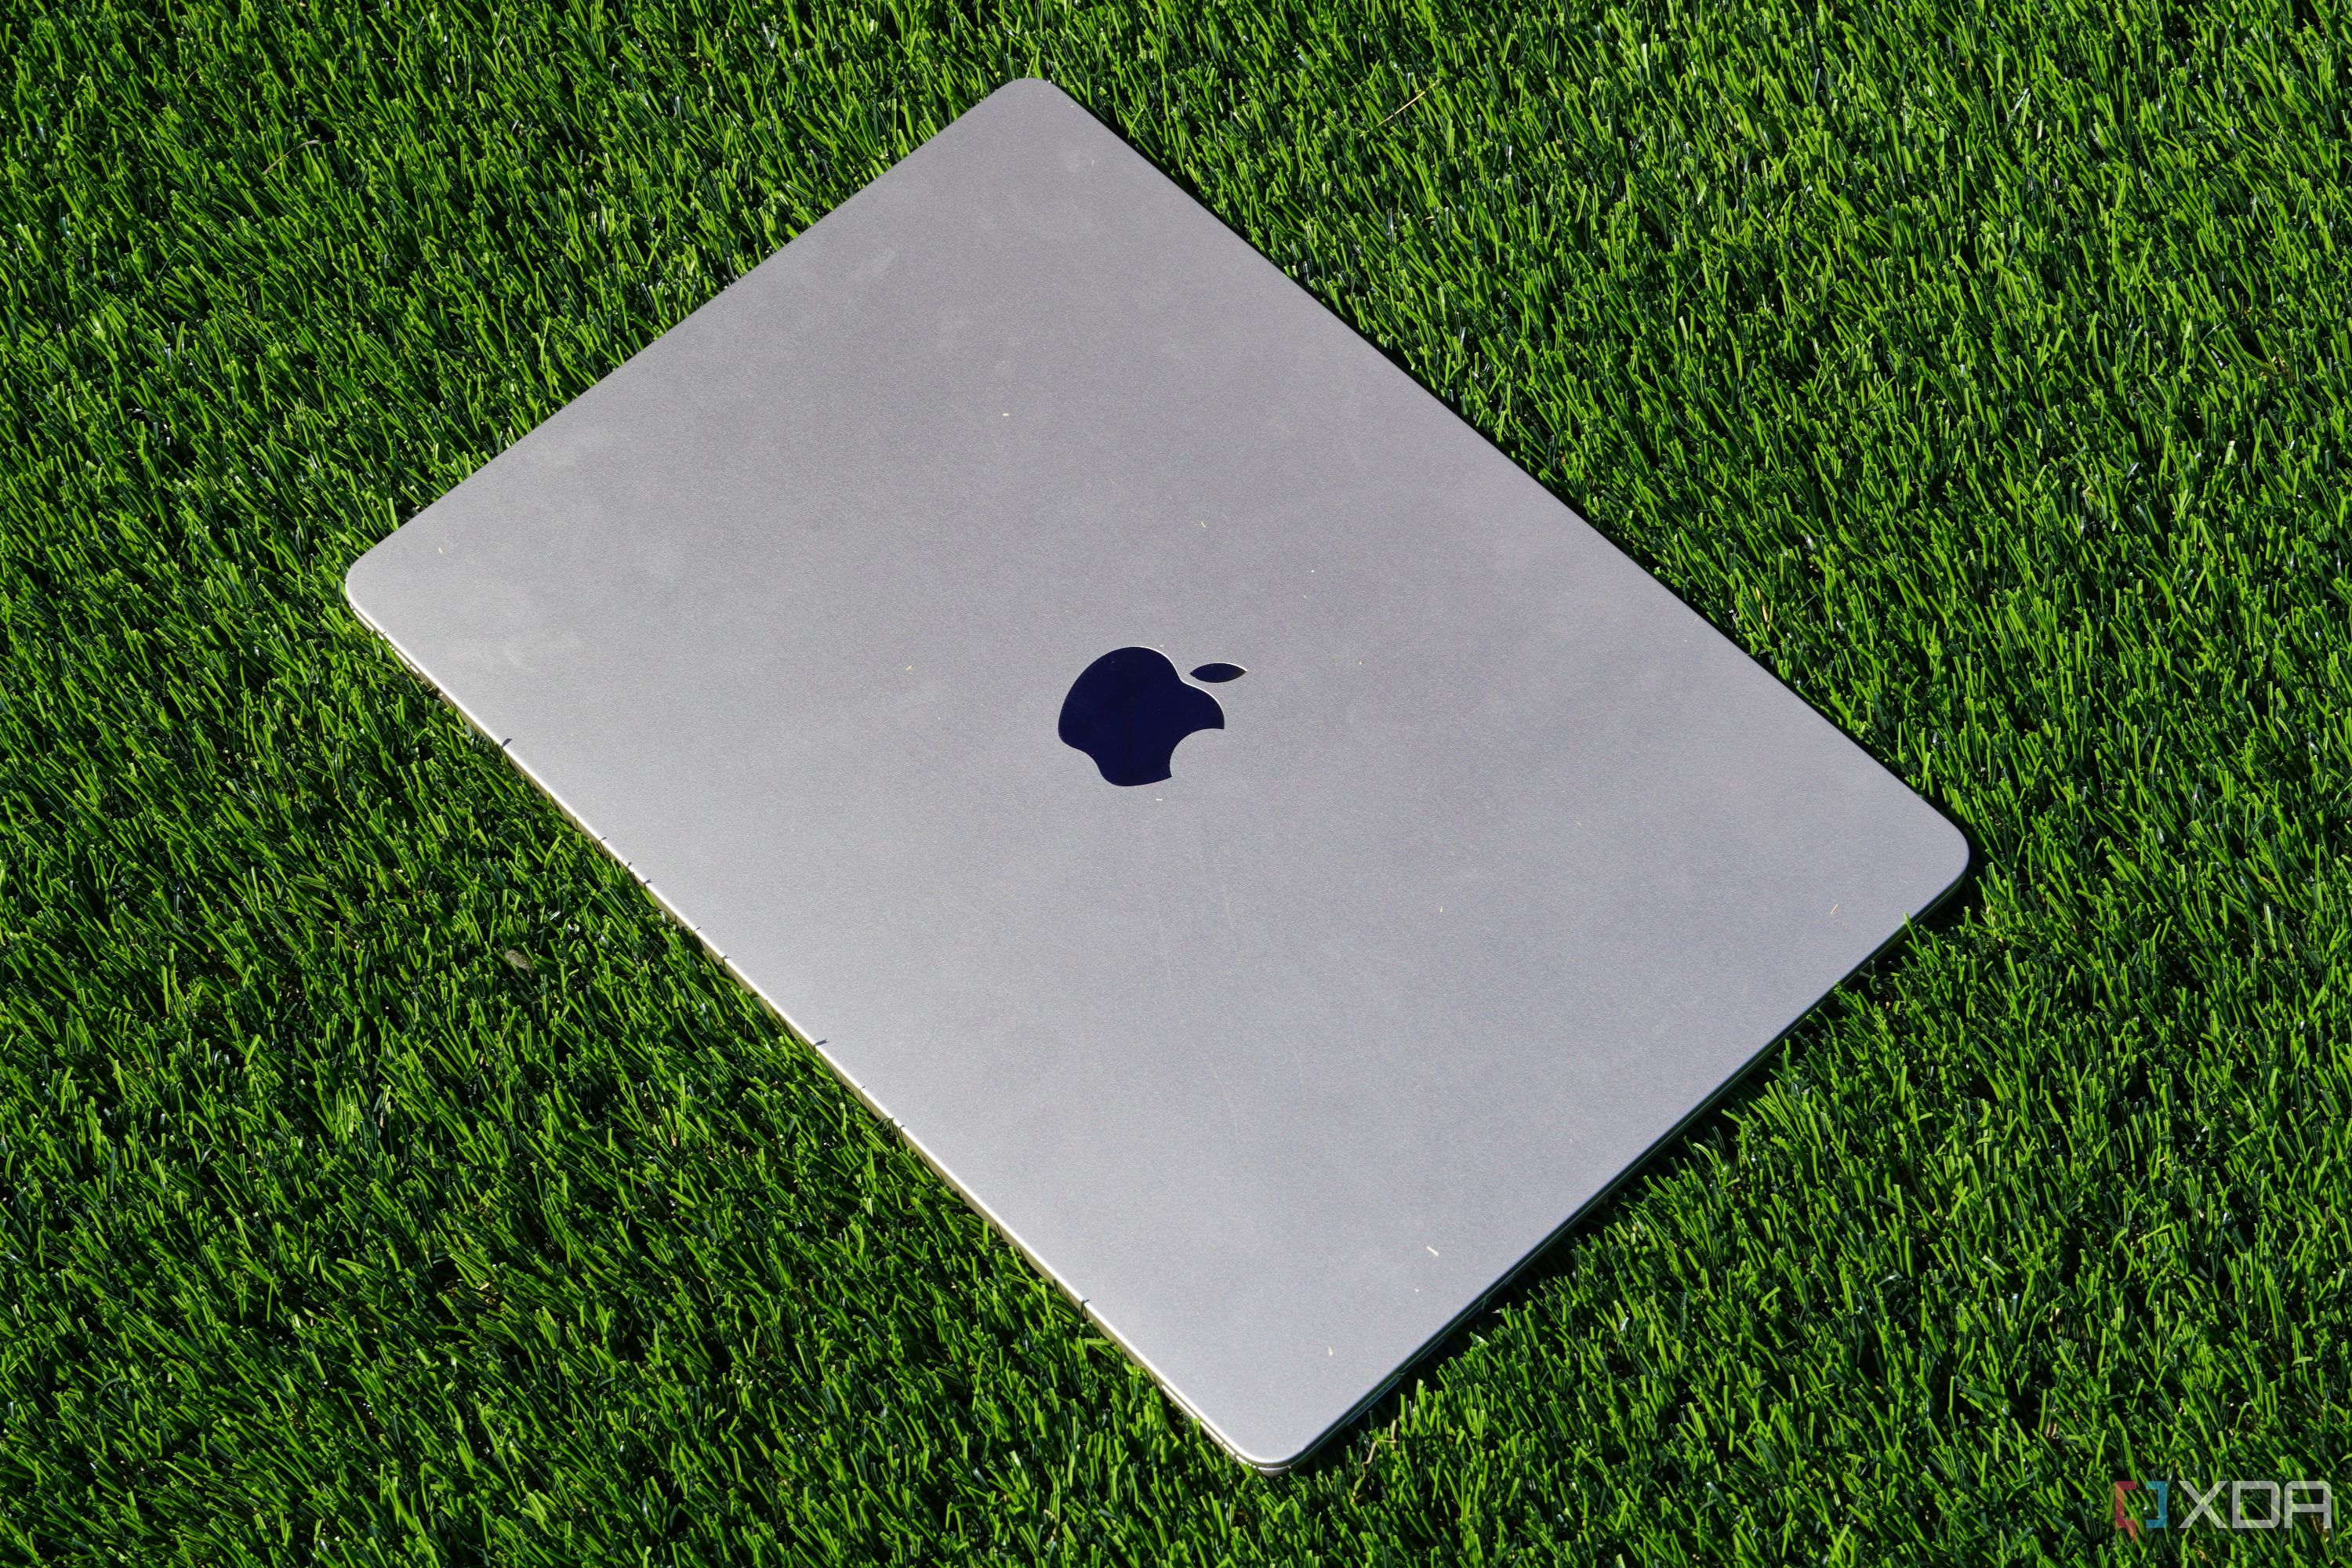 The Starlight color of the MacBook Air (15-inch) on artificial grass.